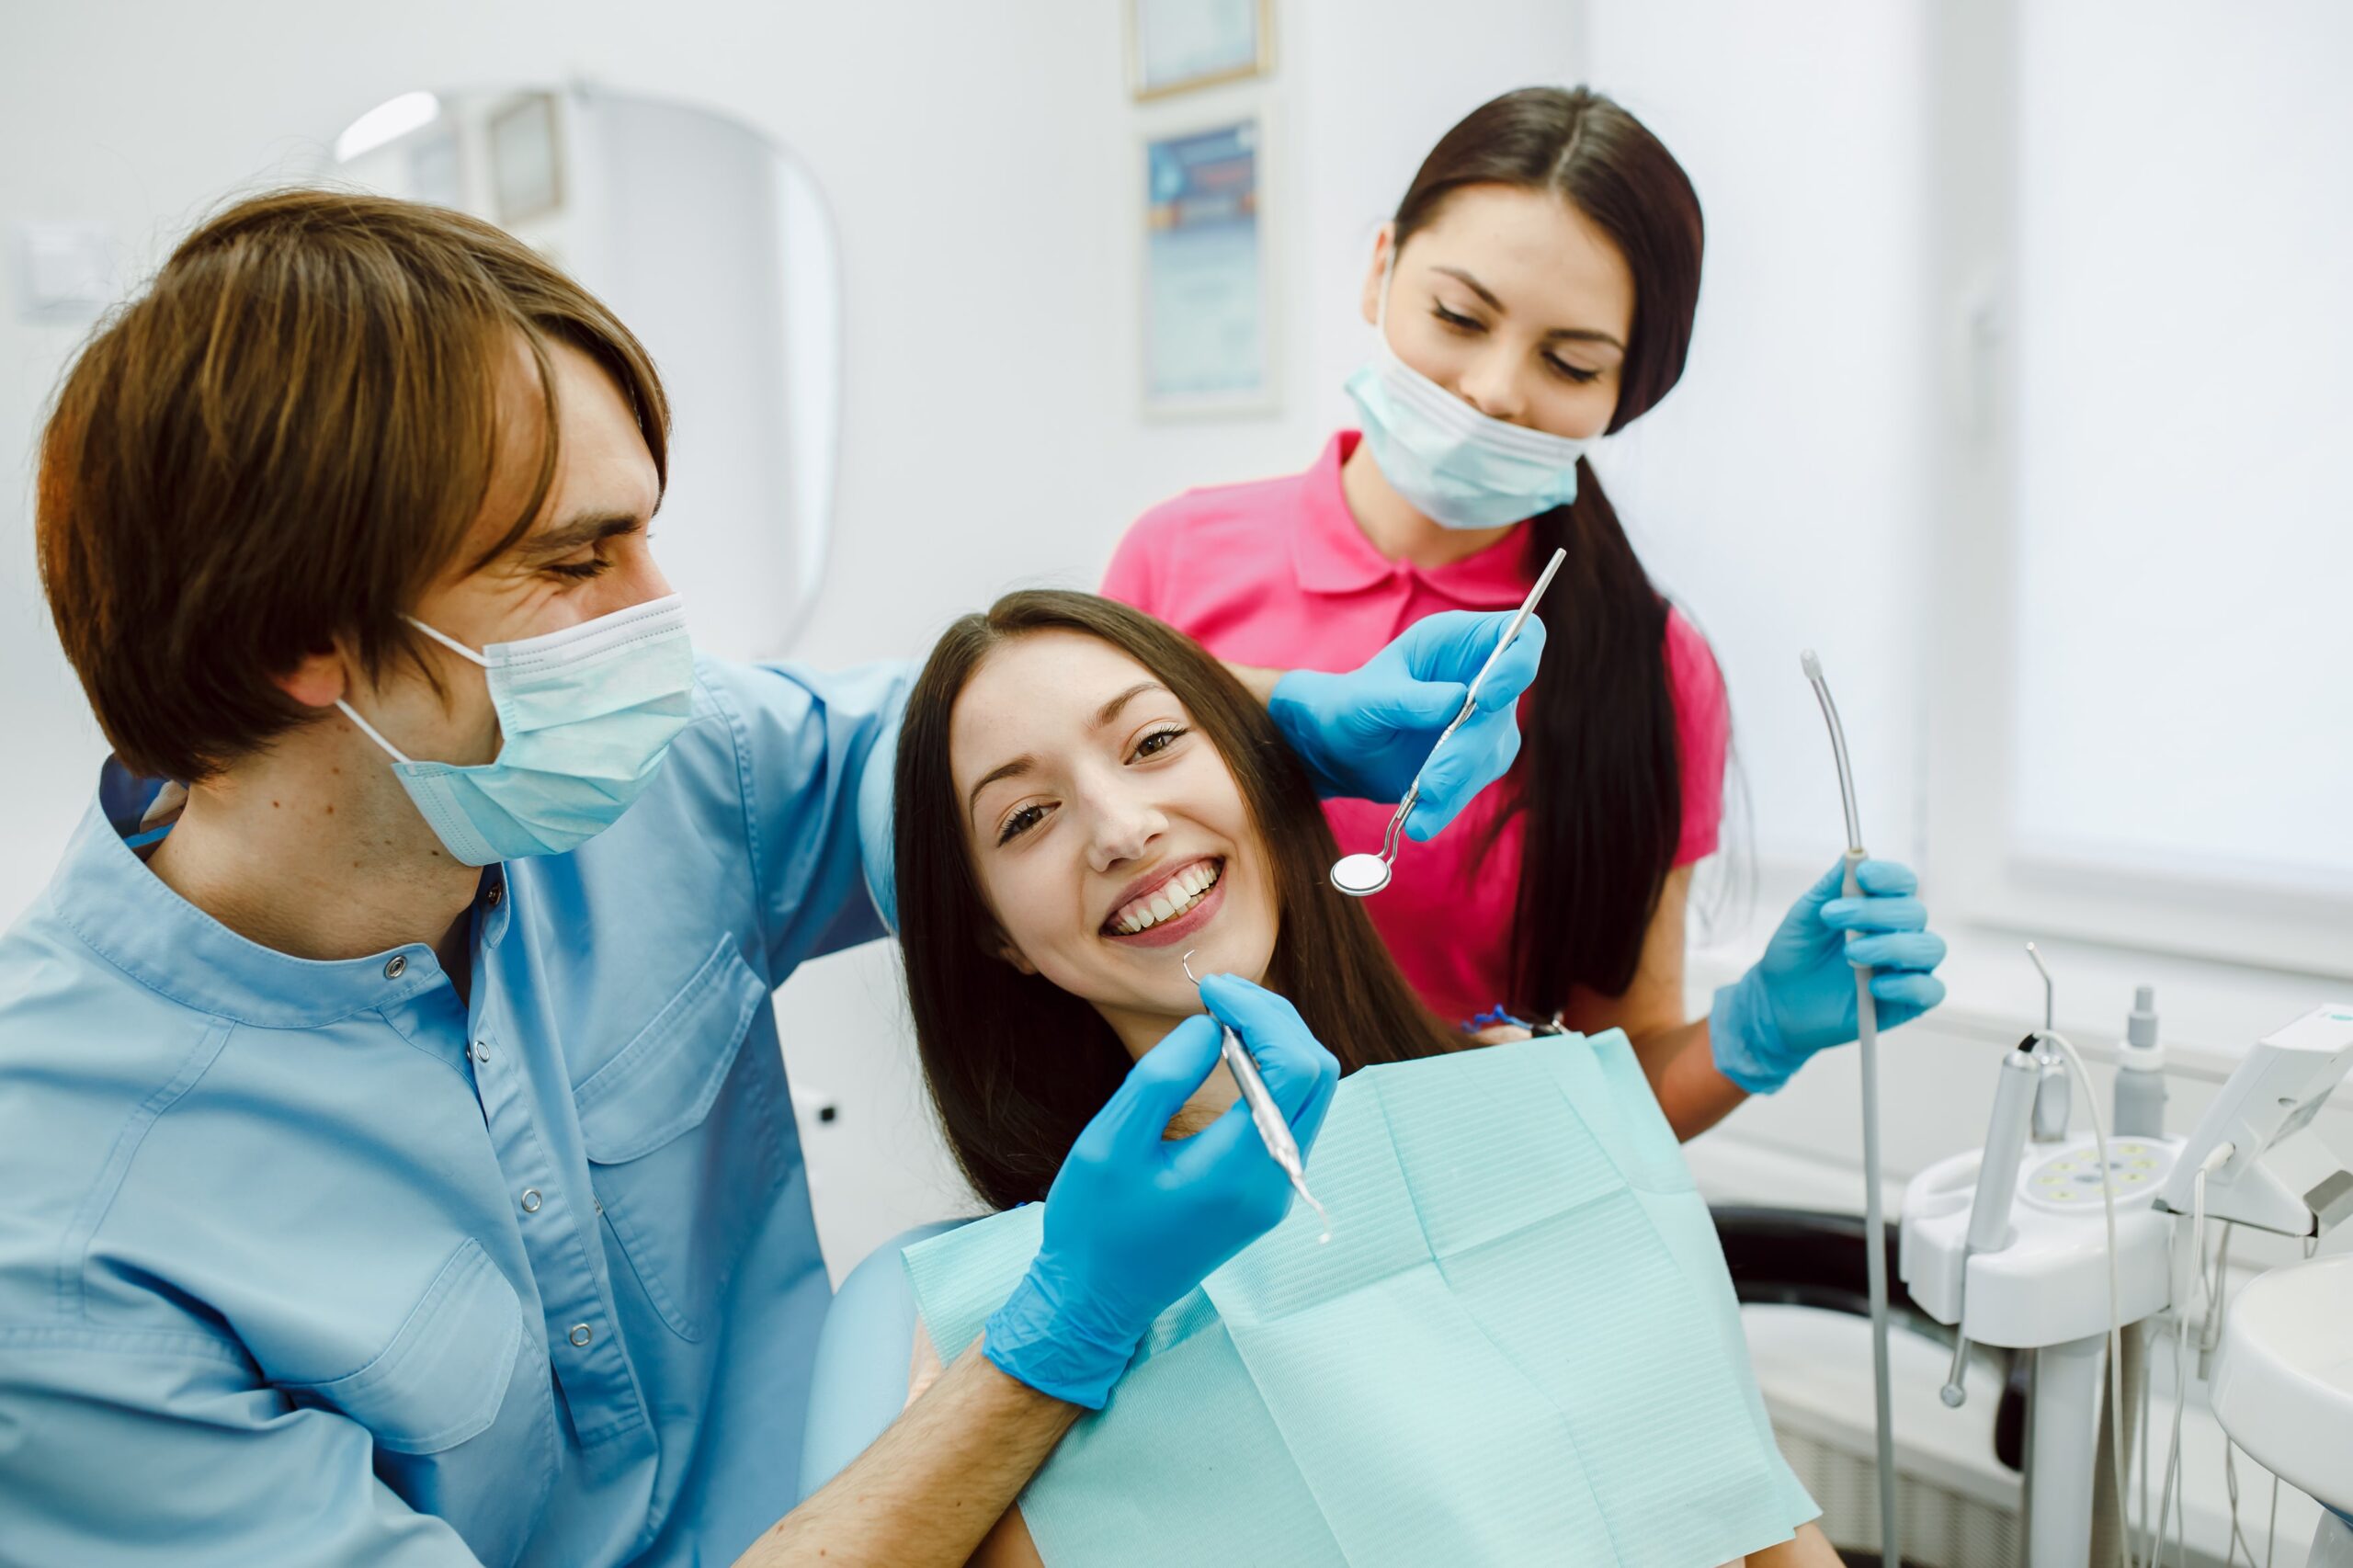 NEED-TO-KNOW DENTAL TREATMENT OPTIONS IN TURKEY